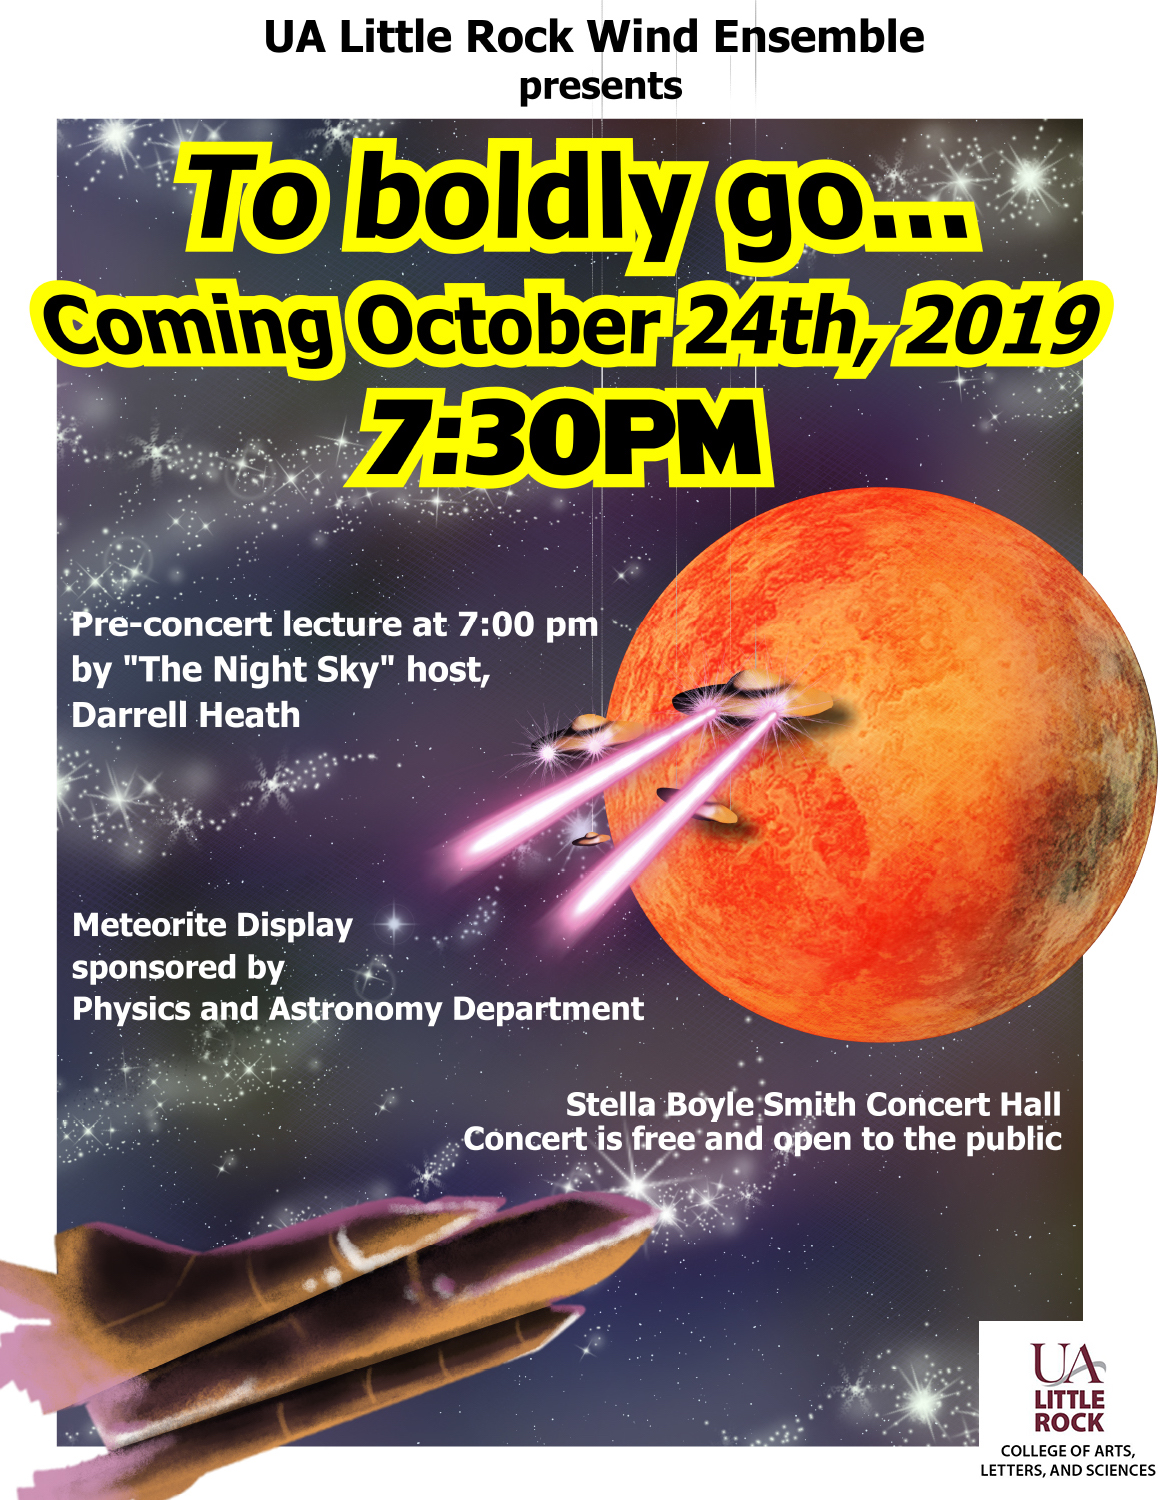 The University of Arkansas at Little Rock Wind Ensemble will host an out-of-this-world concert Oct. 24 featuring a special astronomy lecture and meteorite display.